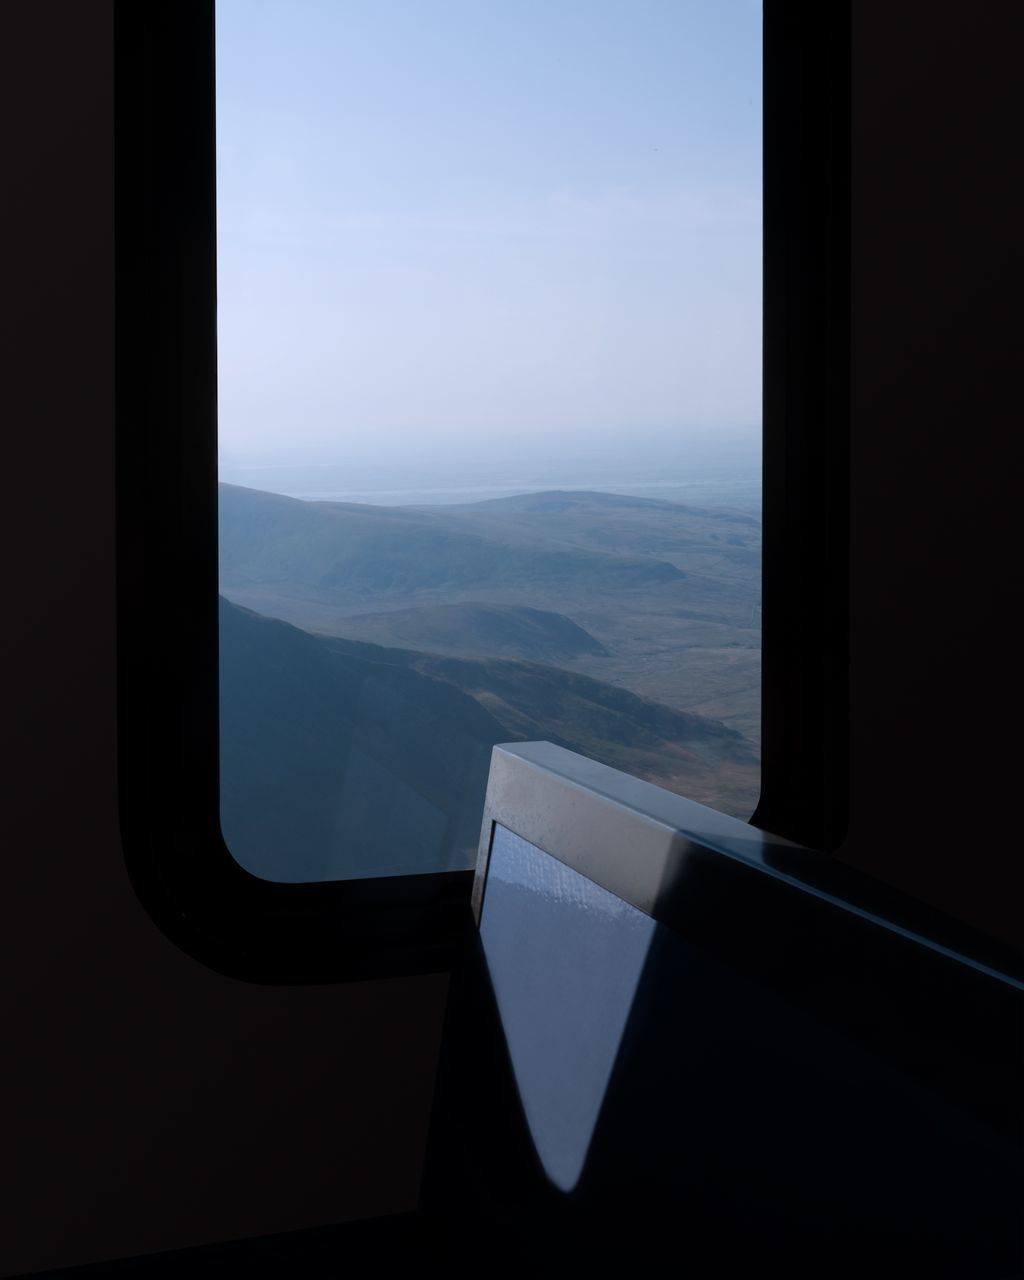 window, air vehicle, airplane, glass - material, mode of transportation, transportation, scenics - nature, transparent, sky, vehicle interior, no people, travel, beauty in nature, day, nature, landscape, flying, indoors, public transportation